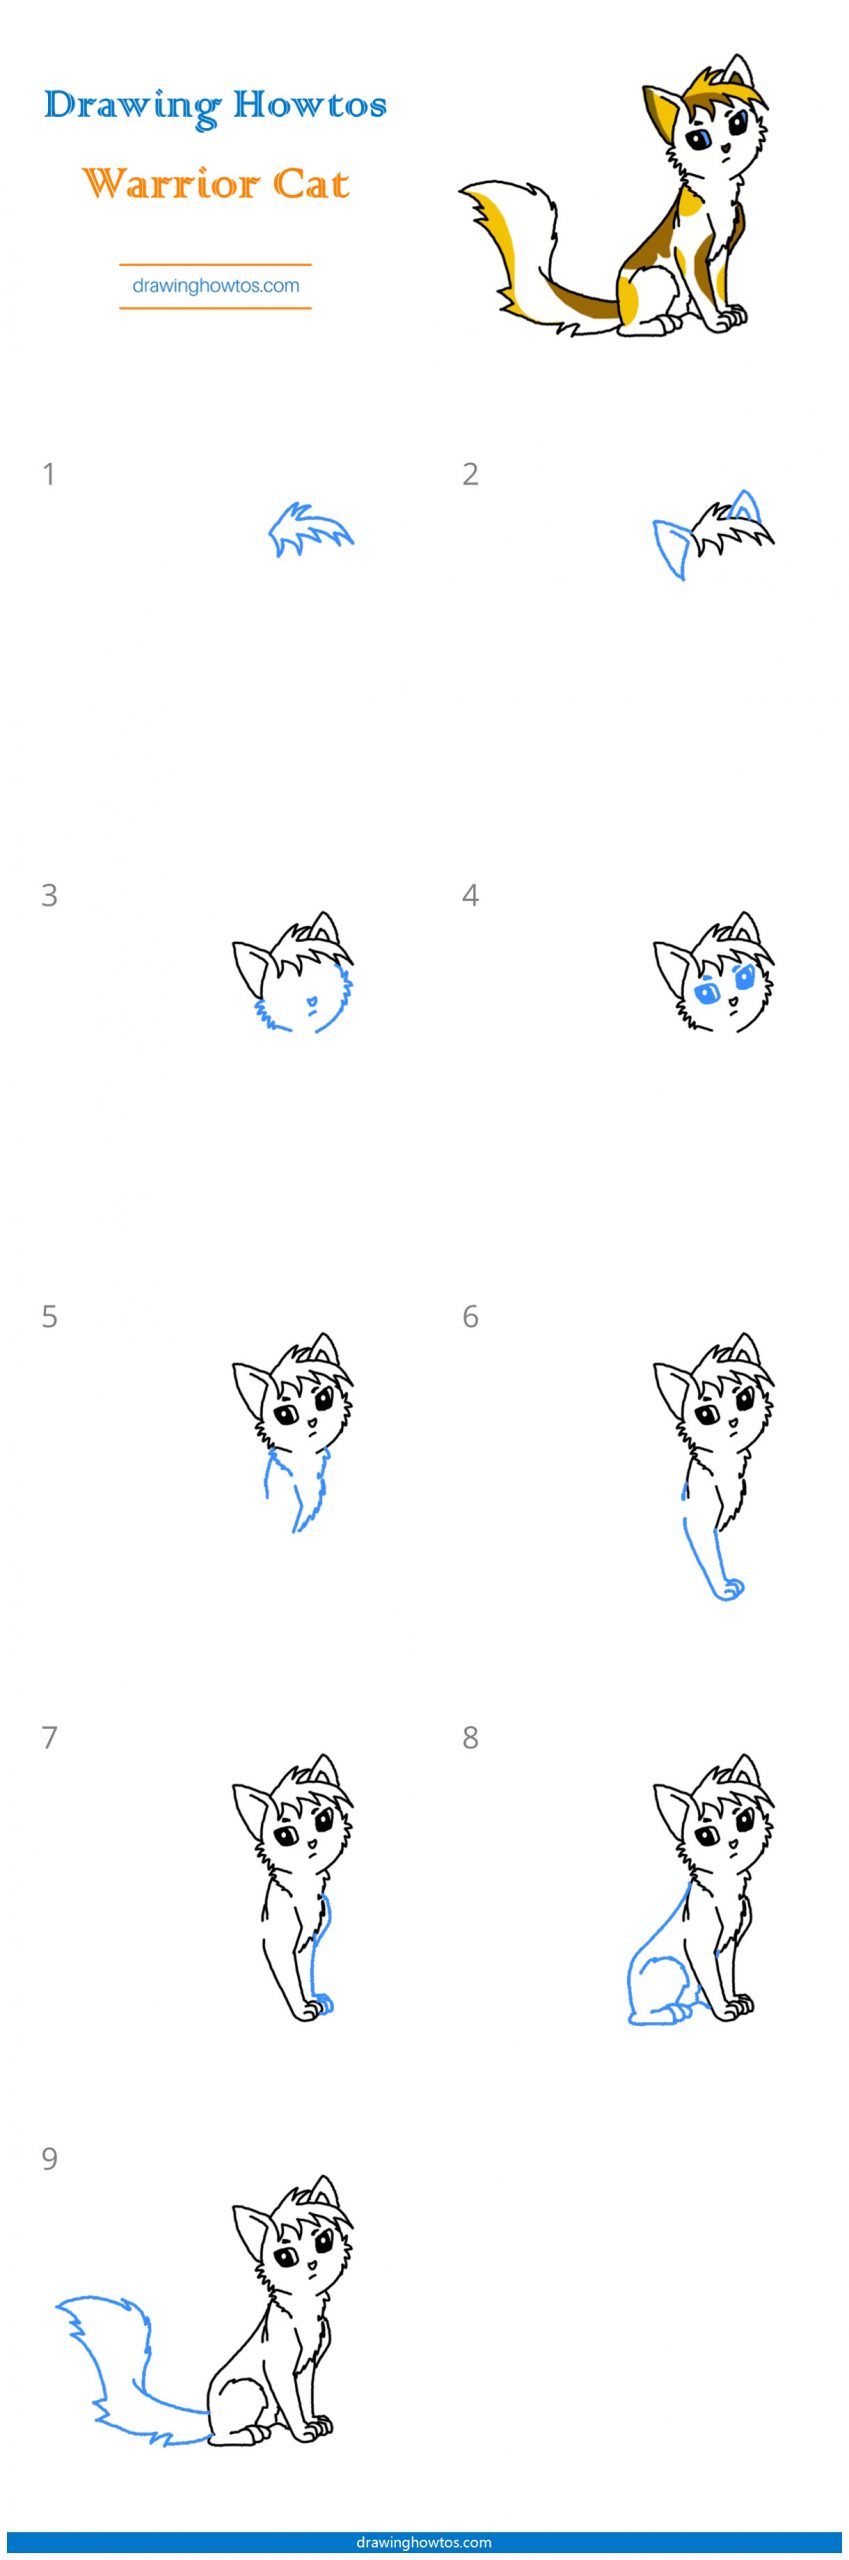 How to Draw a Warrior Cat Step by Step